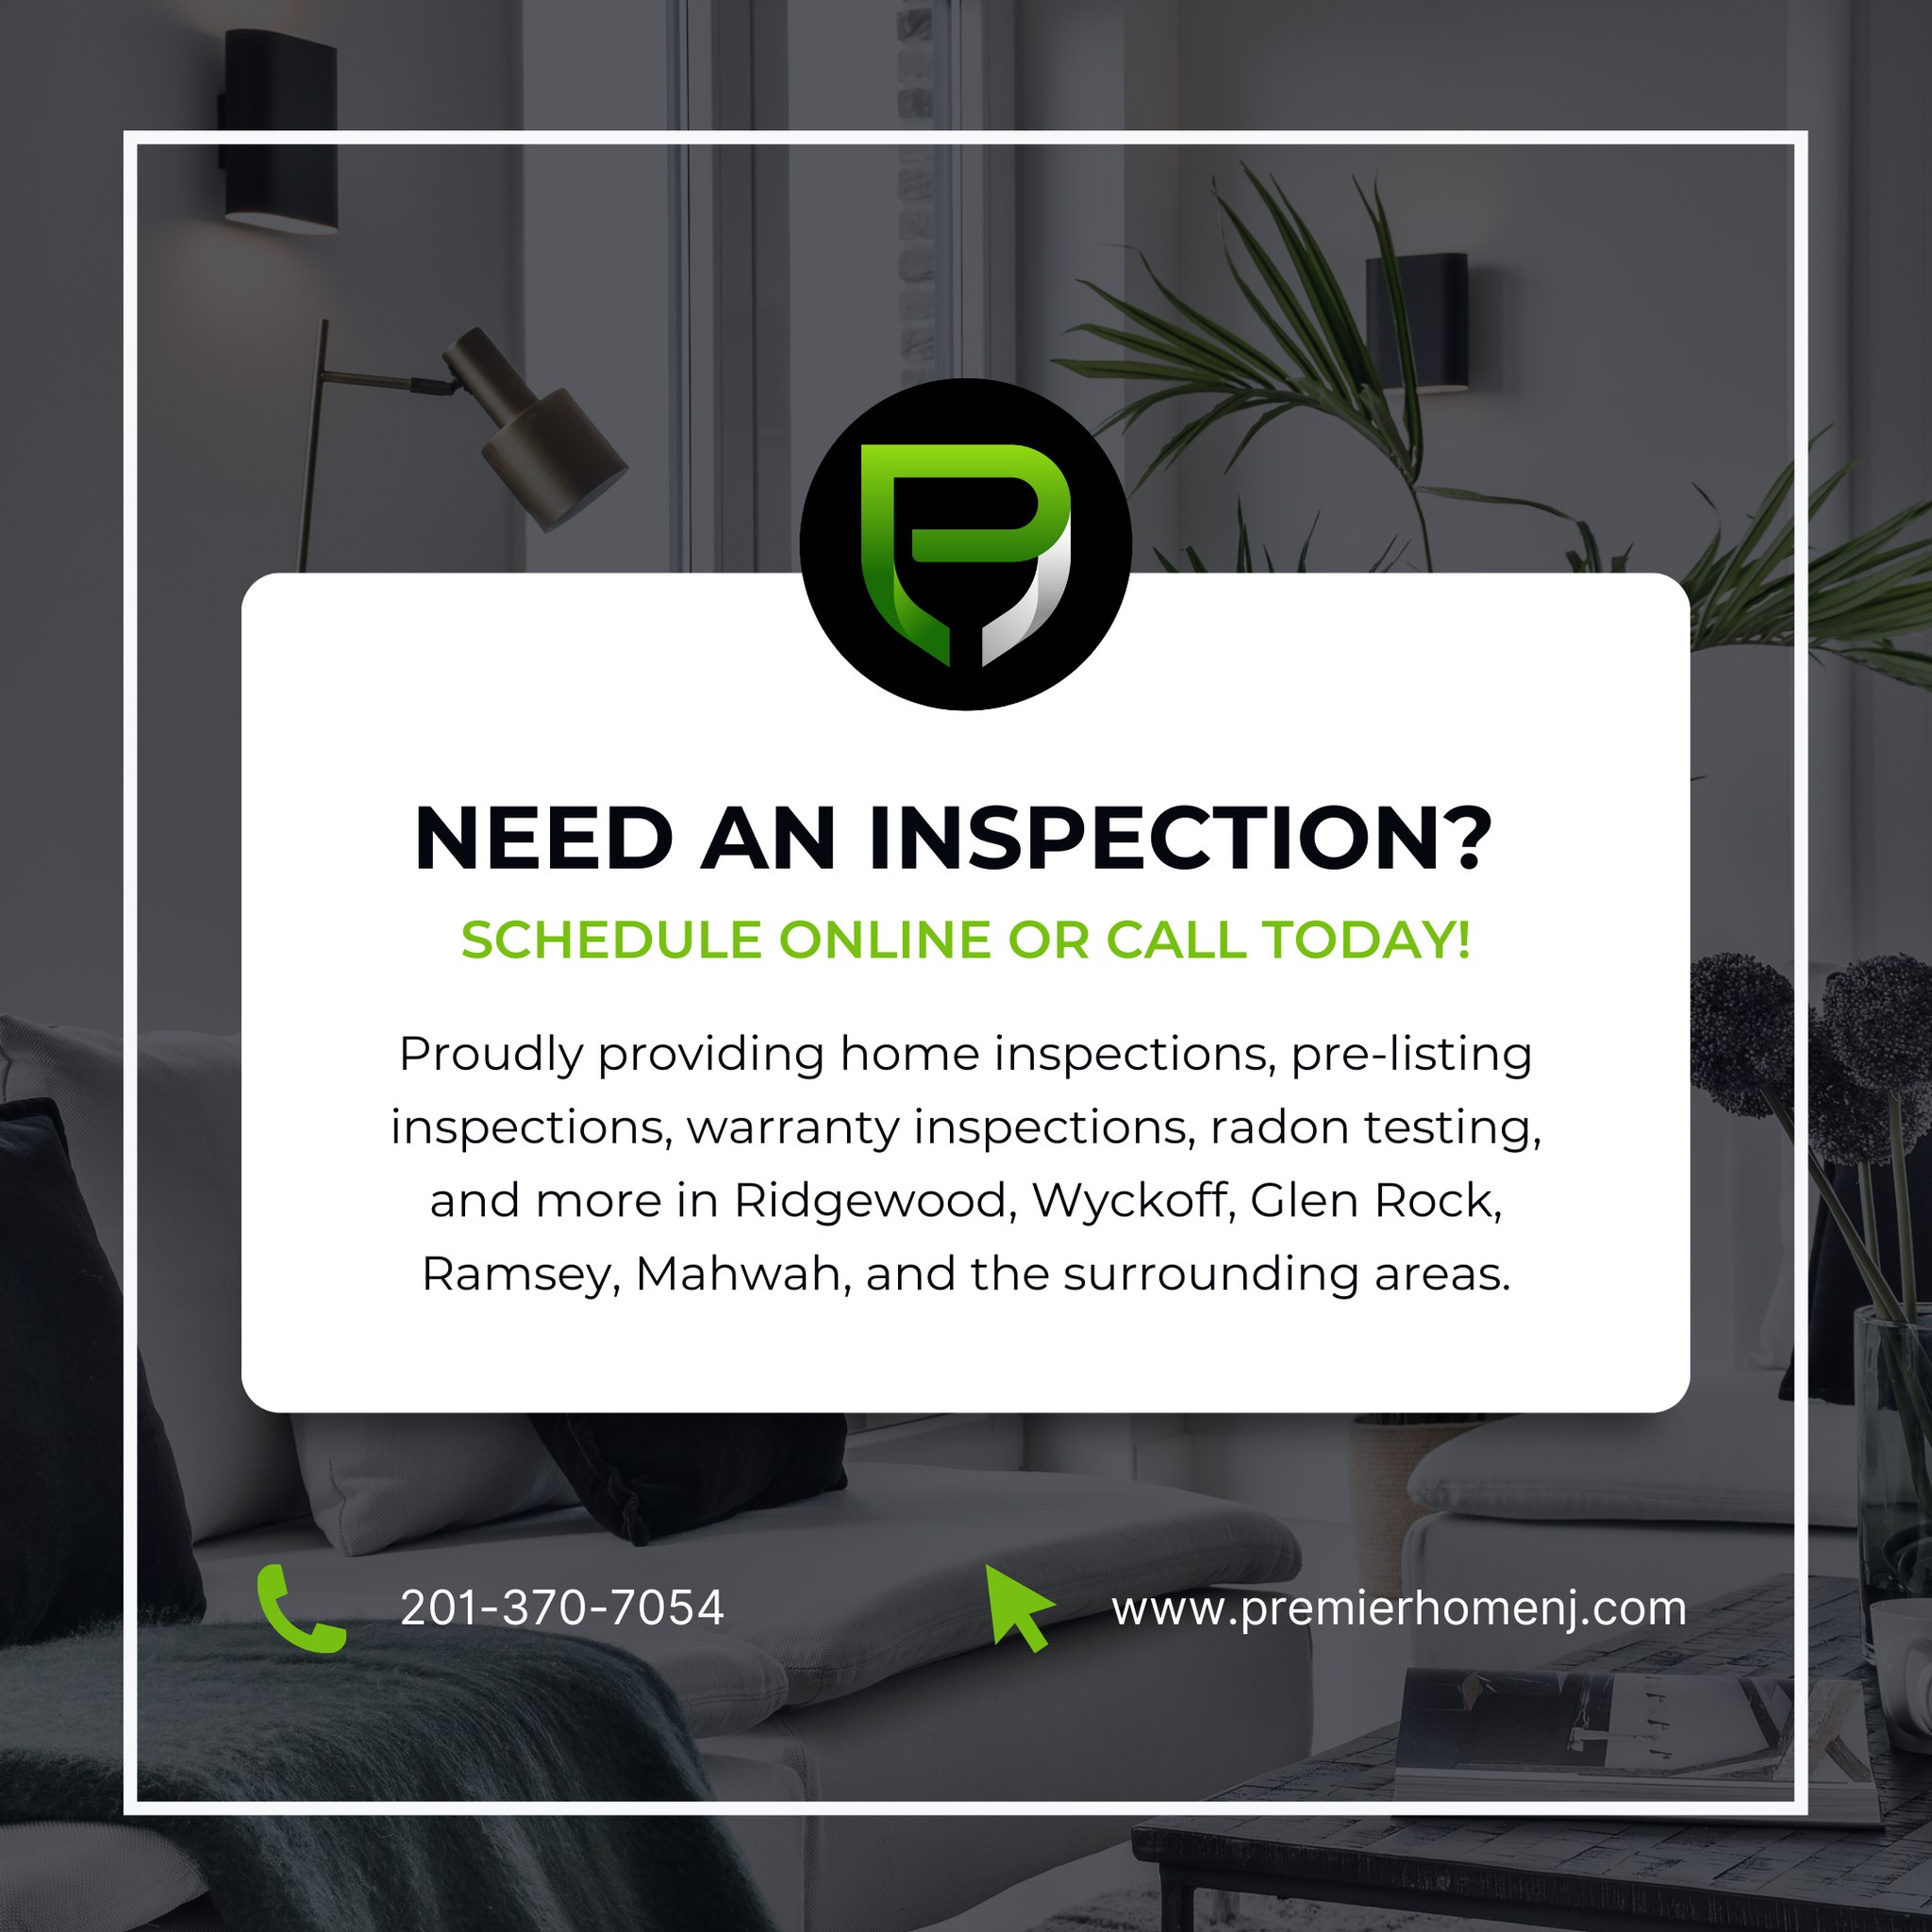 Premier Home Inspection Services, LLC 47 Stone Fence Rd, Allendale New Jersey 07401